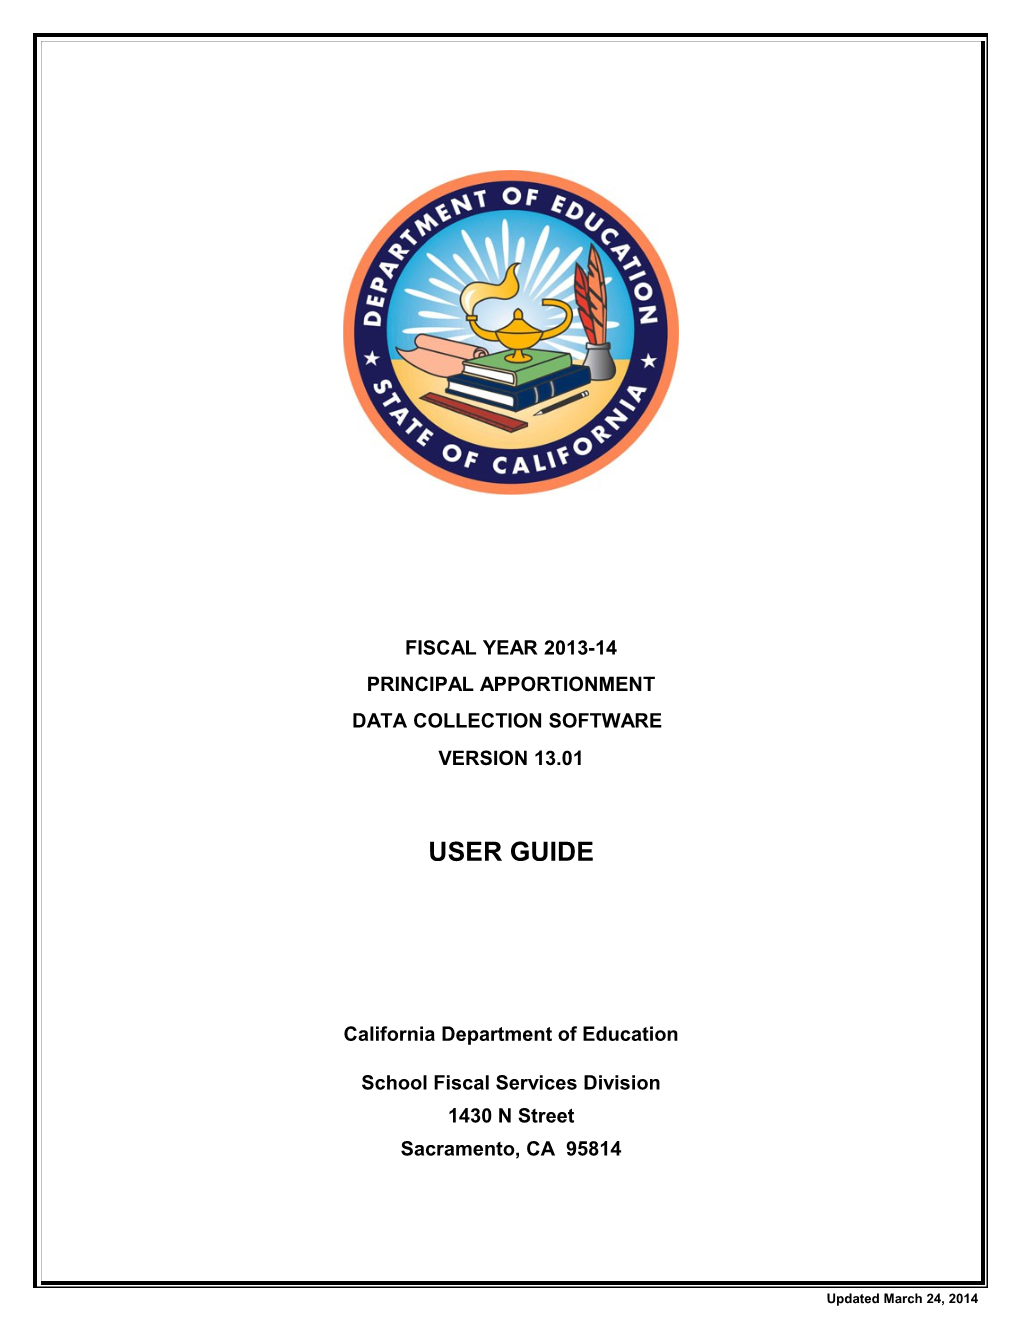 PA Software User Guide, FY 2013-14 P2 - Principal Apportionment (CA Dept of Education)